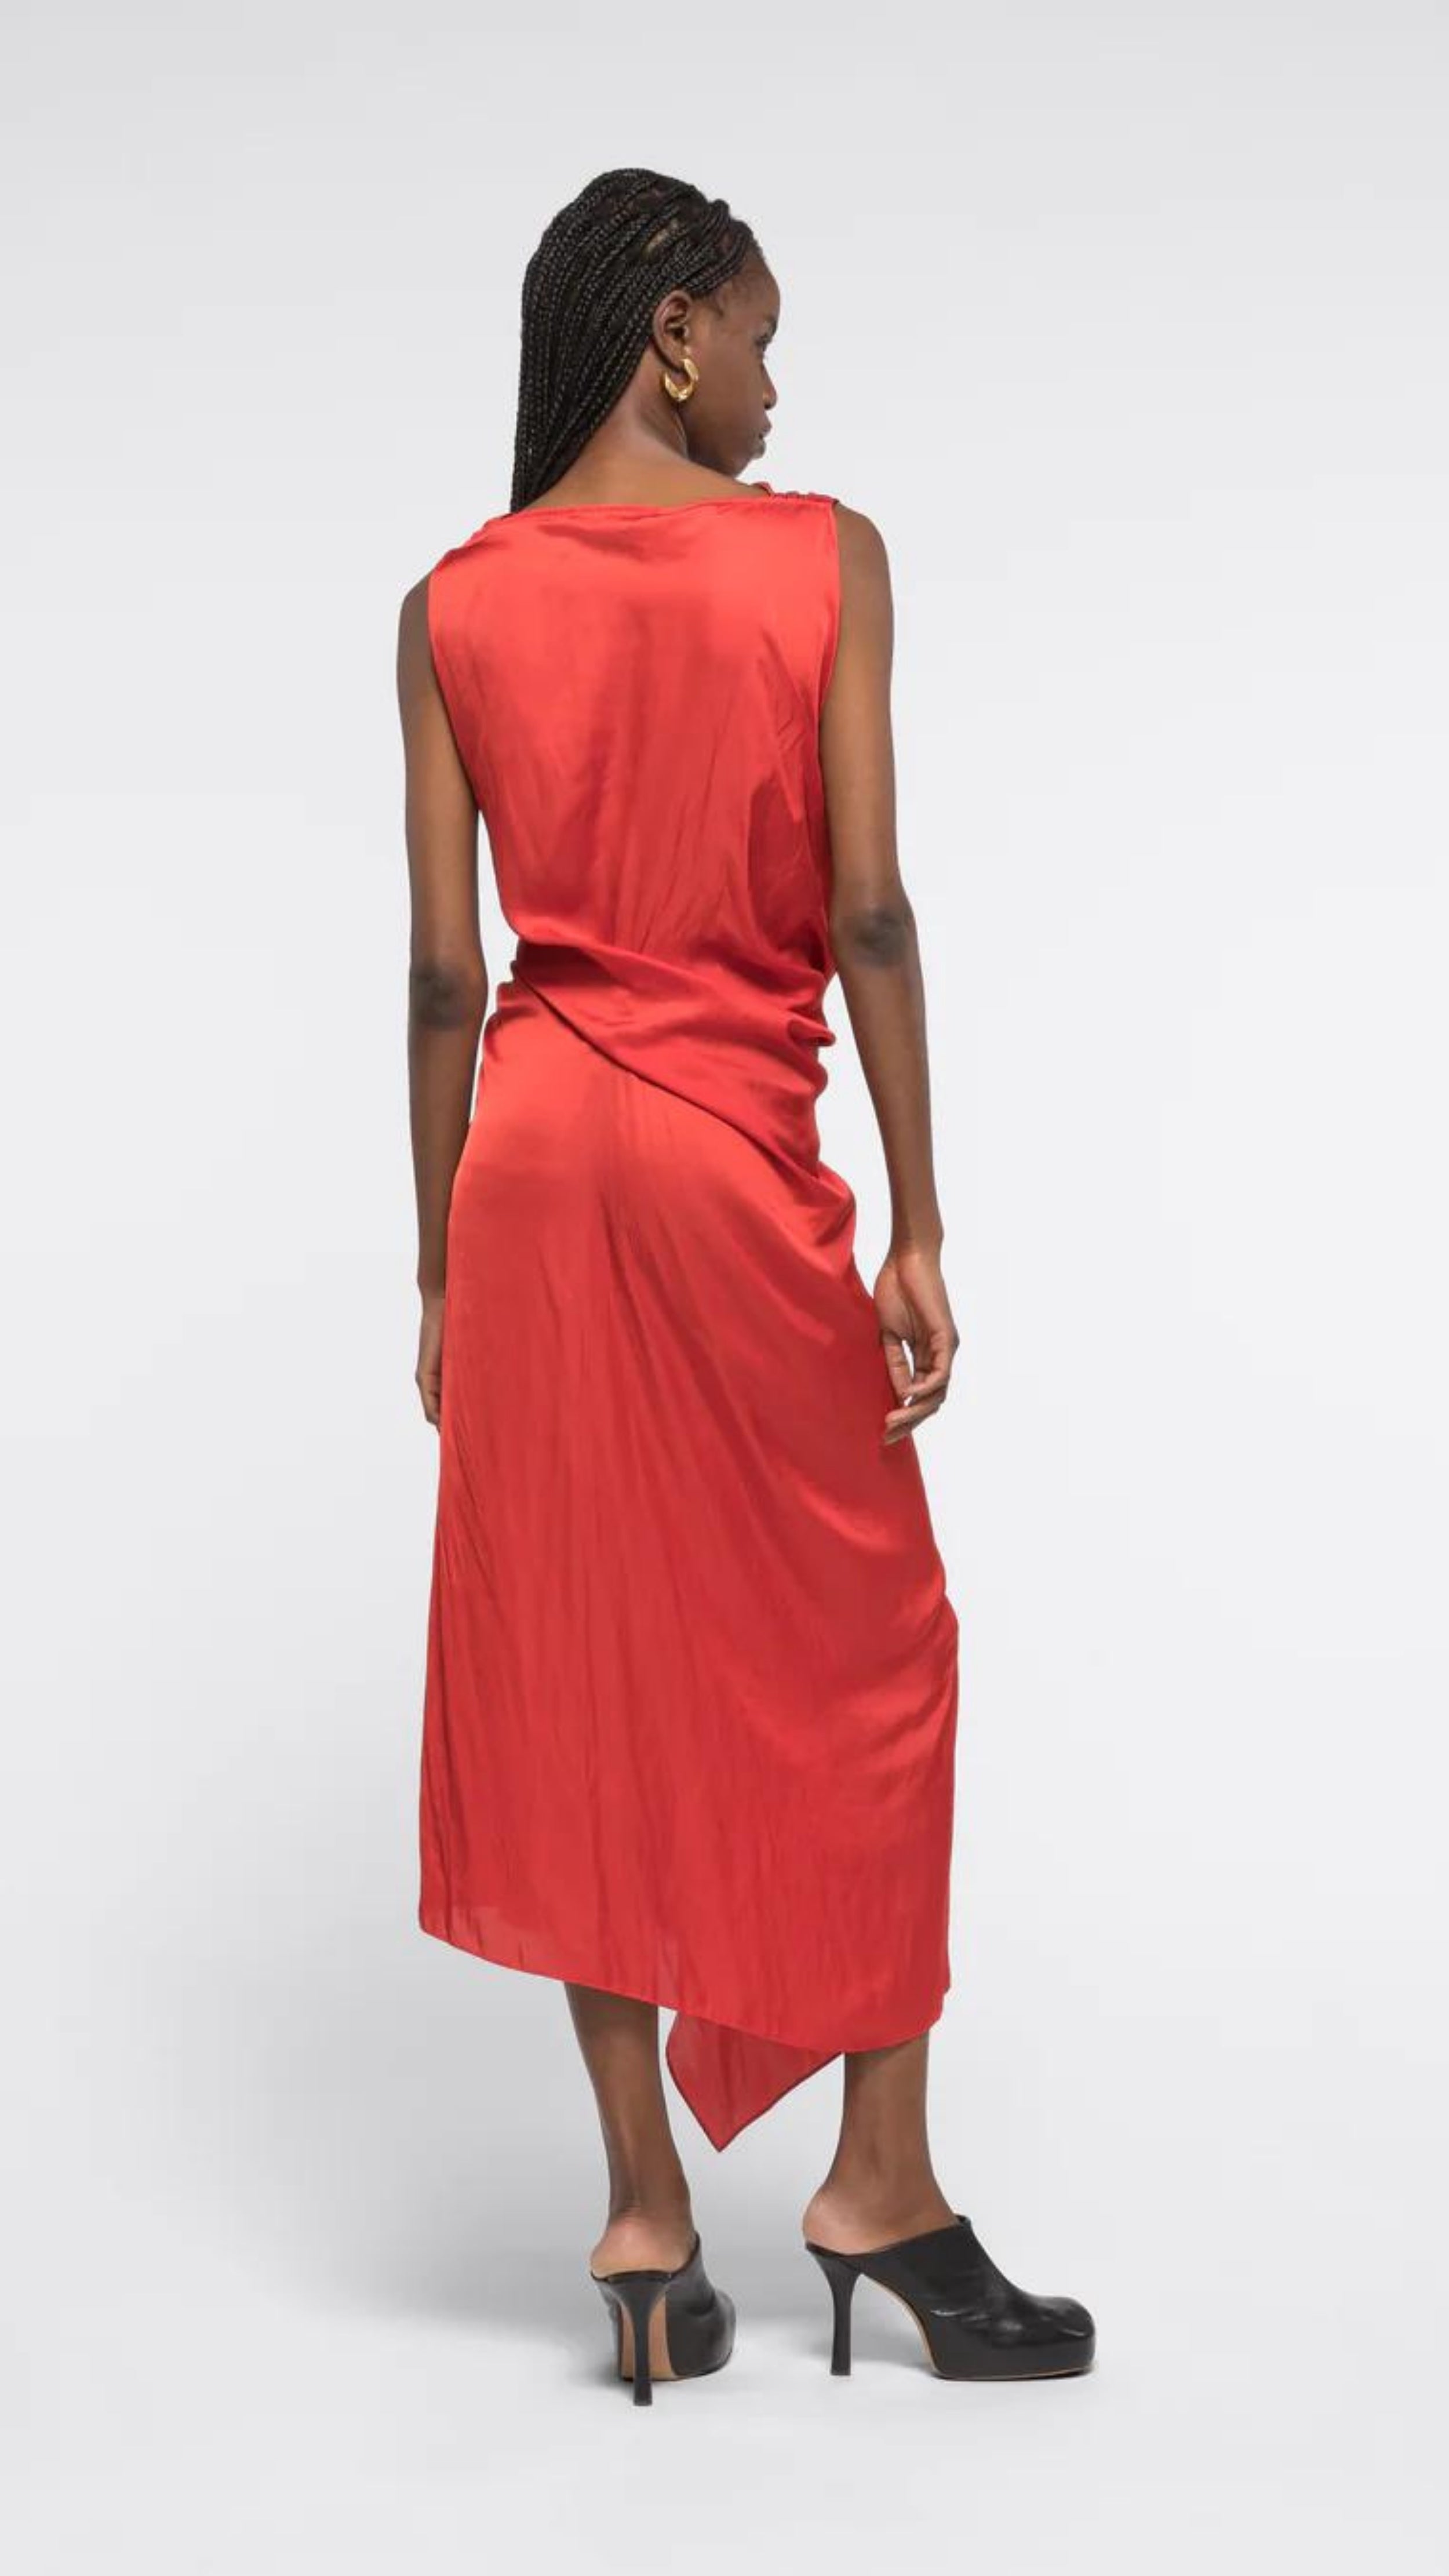 AZ Factory Colville Molly Molloy Lucinda Chambers, Sleeveless Draped Dress in Red An elegant red formal dress with a silhouette defined by a straight neckline and asymmetrical hemline. The waistline has detailed draping and the front leg as a slit. Shown on model from back.